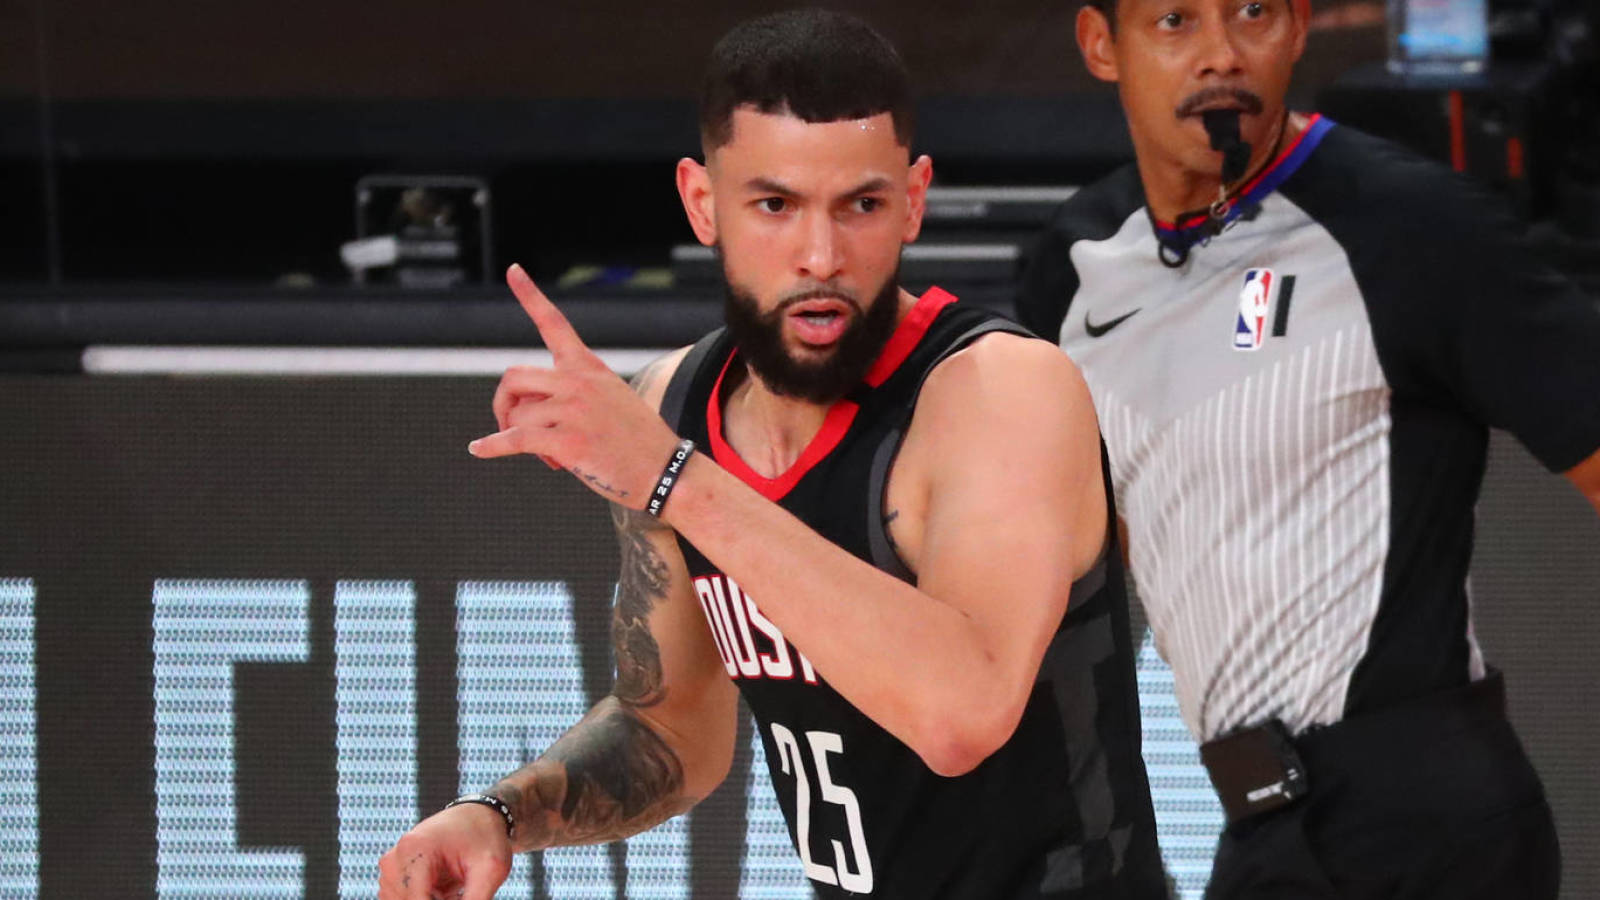 Austin Rivers intends to decline player option, become free agent | Yardbarker